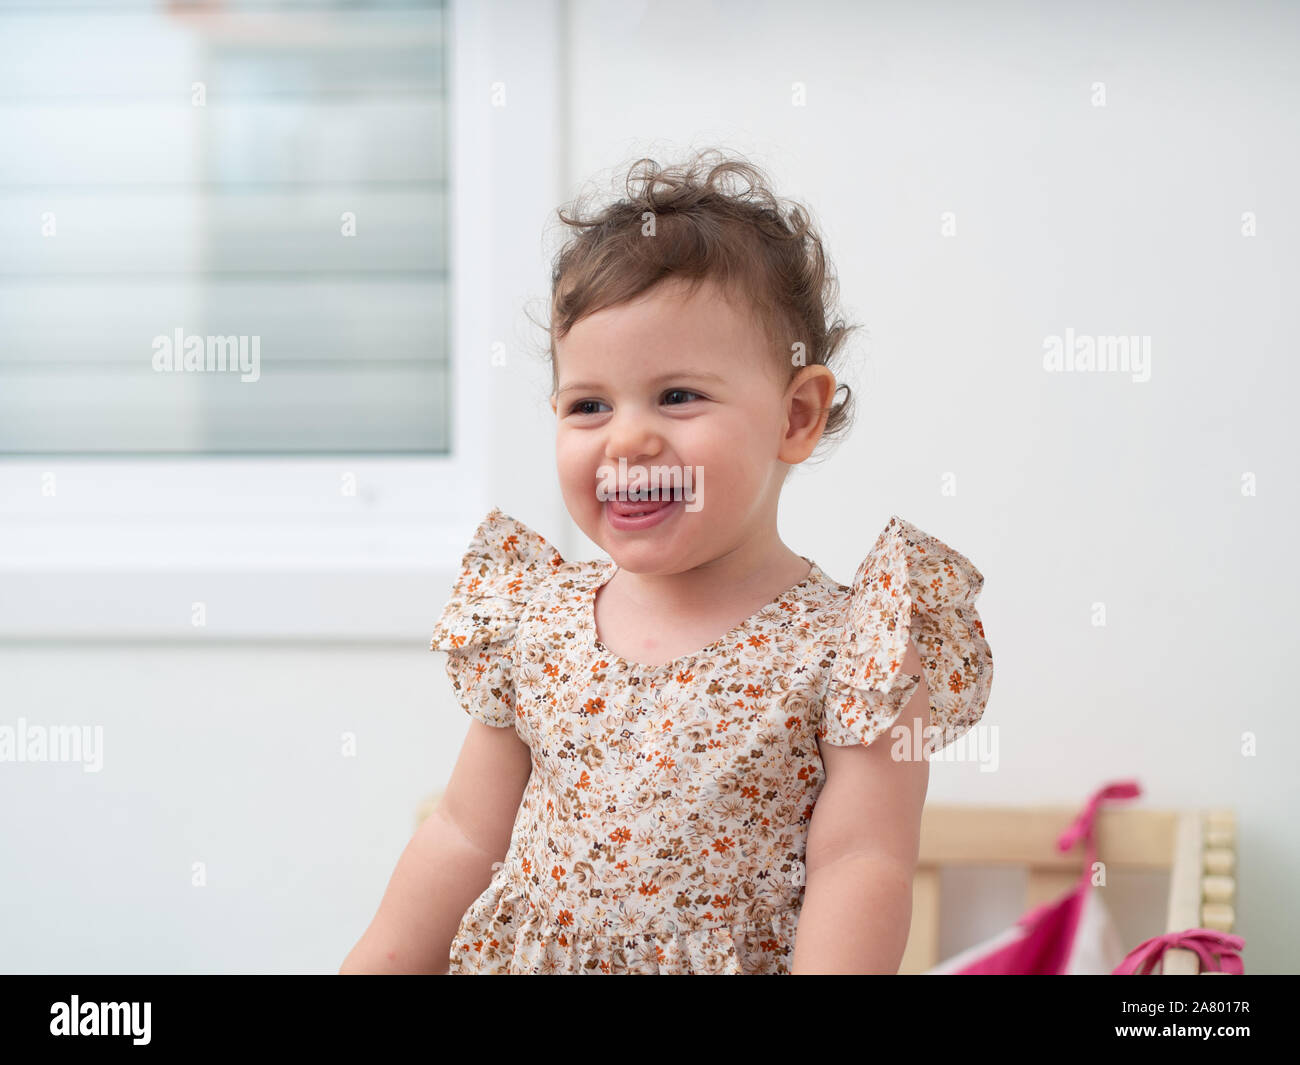 1 year old baby girl stands in her cot (or crib) Stock Photo